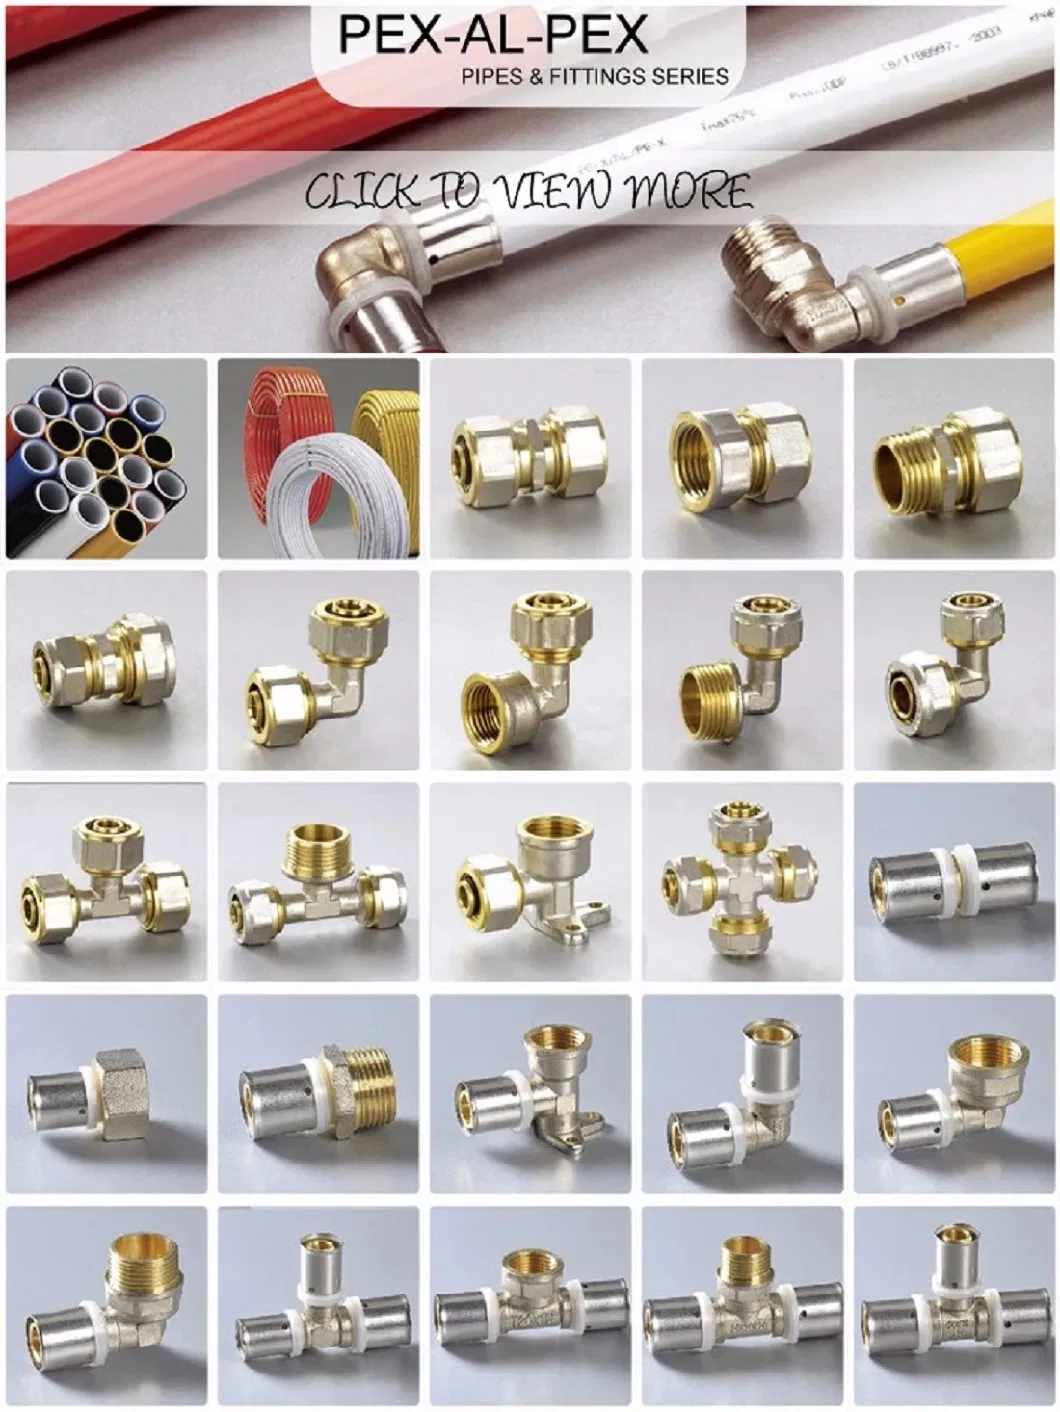 High Quality Plumbing Pex Pipe Crimp Fittings Brass Slide Pex Pipe Fittings for Heating Floor System/Brass Material Water Pipe Connector, Unequal Tee Sliding